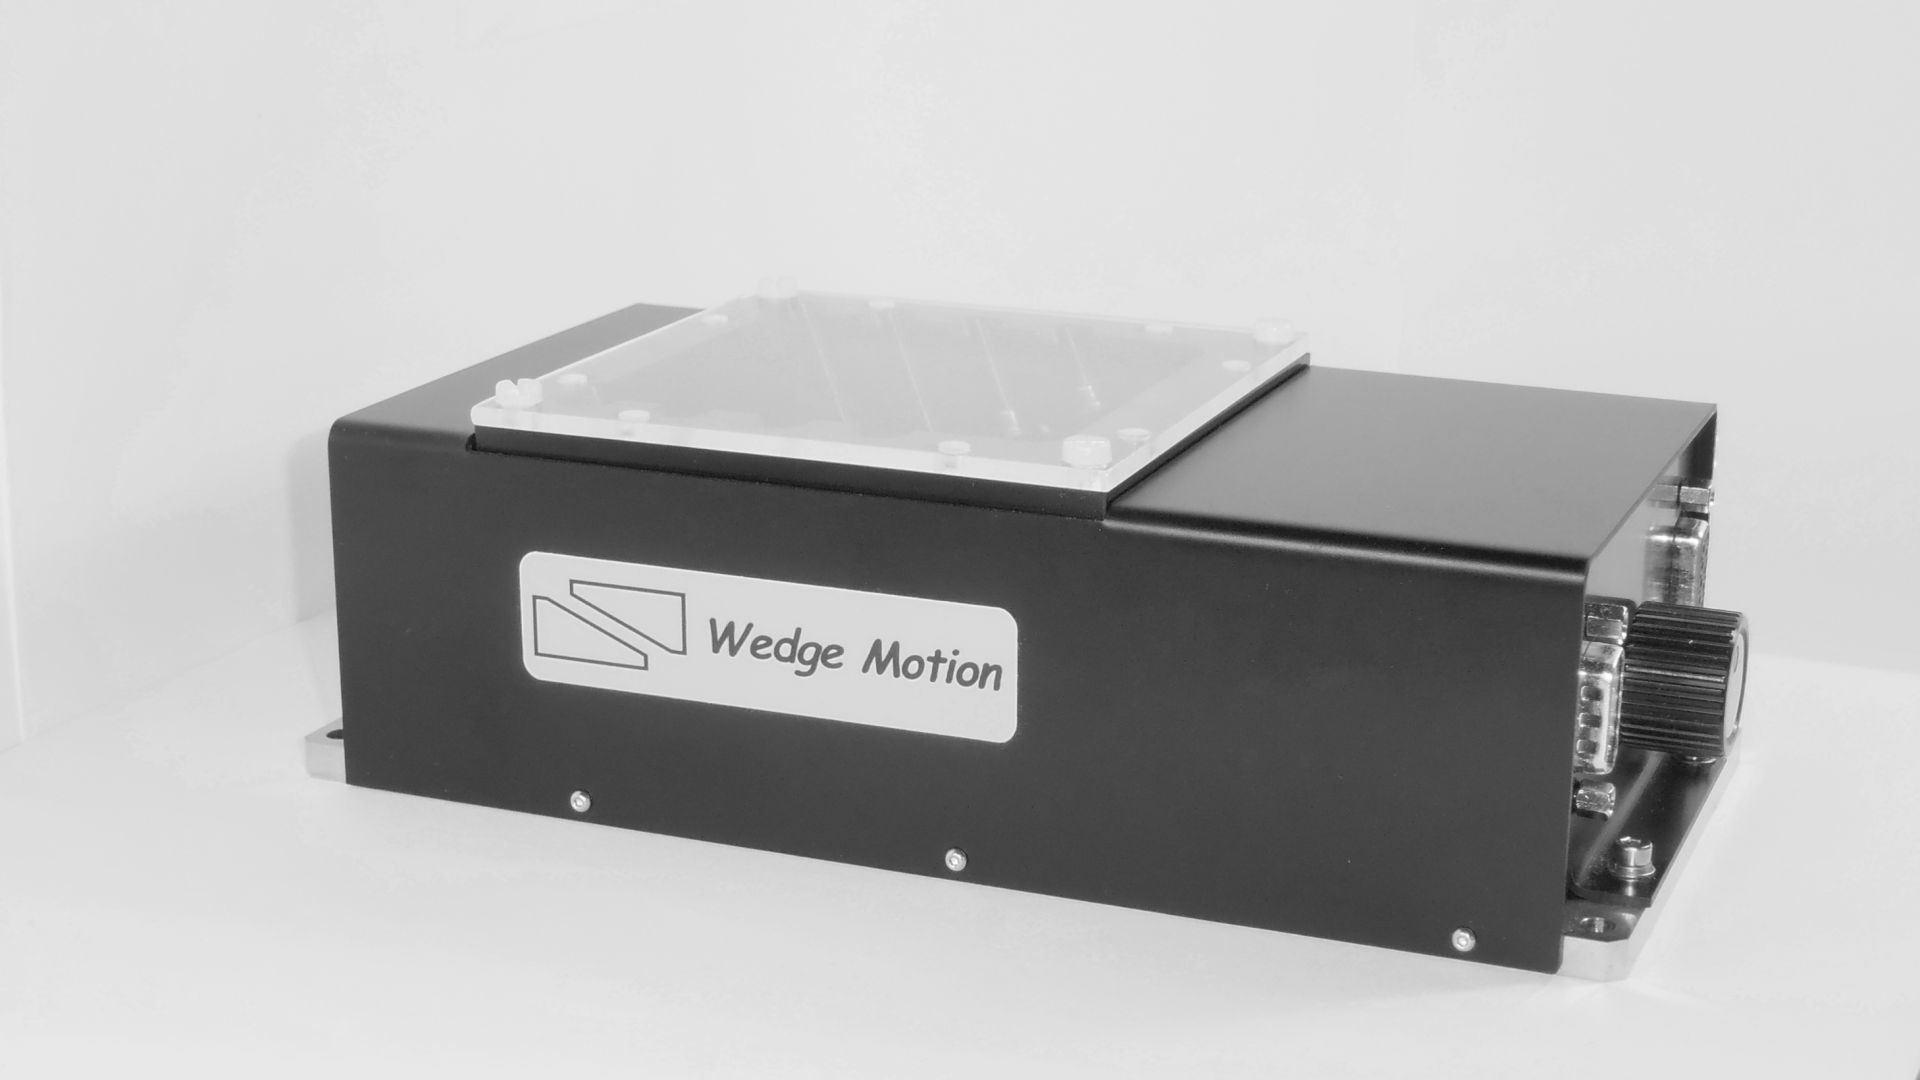 Motorized precision Z-axis stage by Wedge Motion